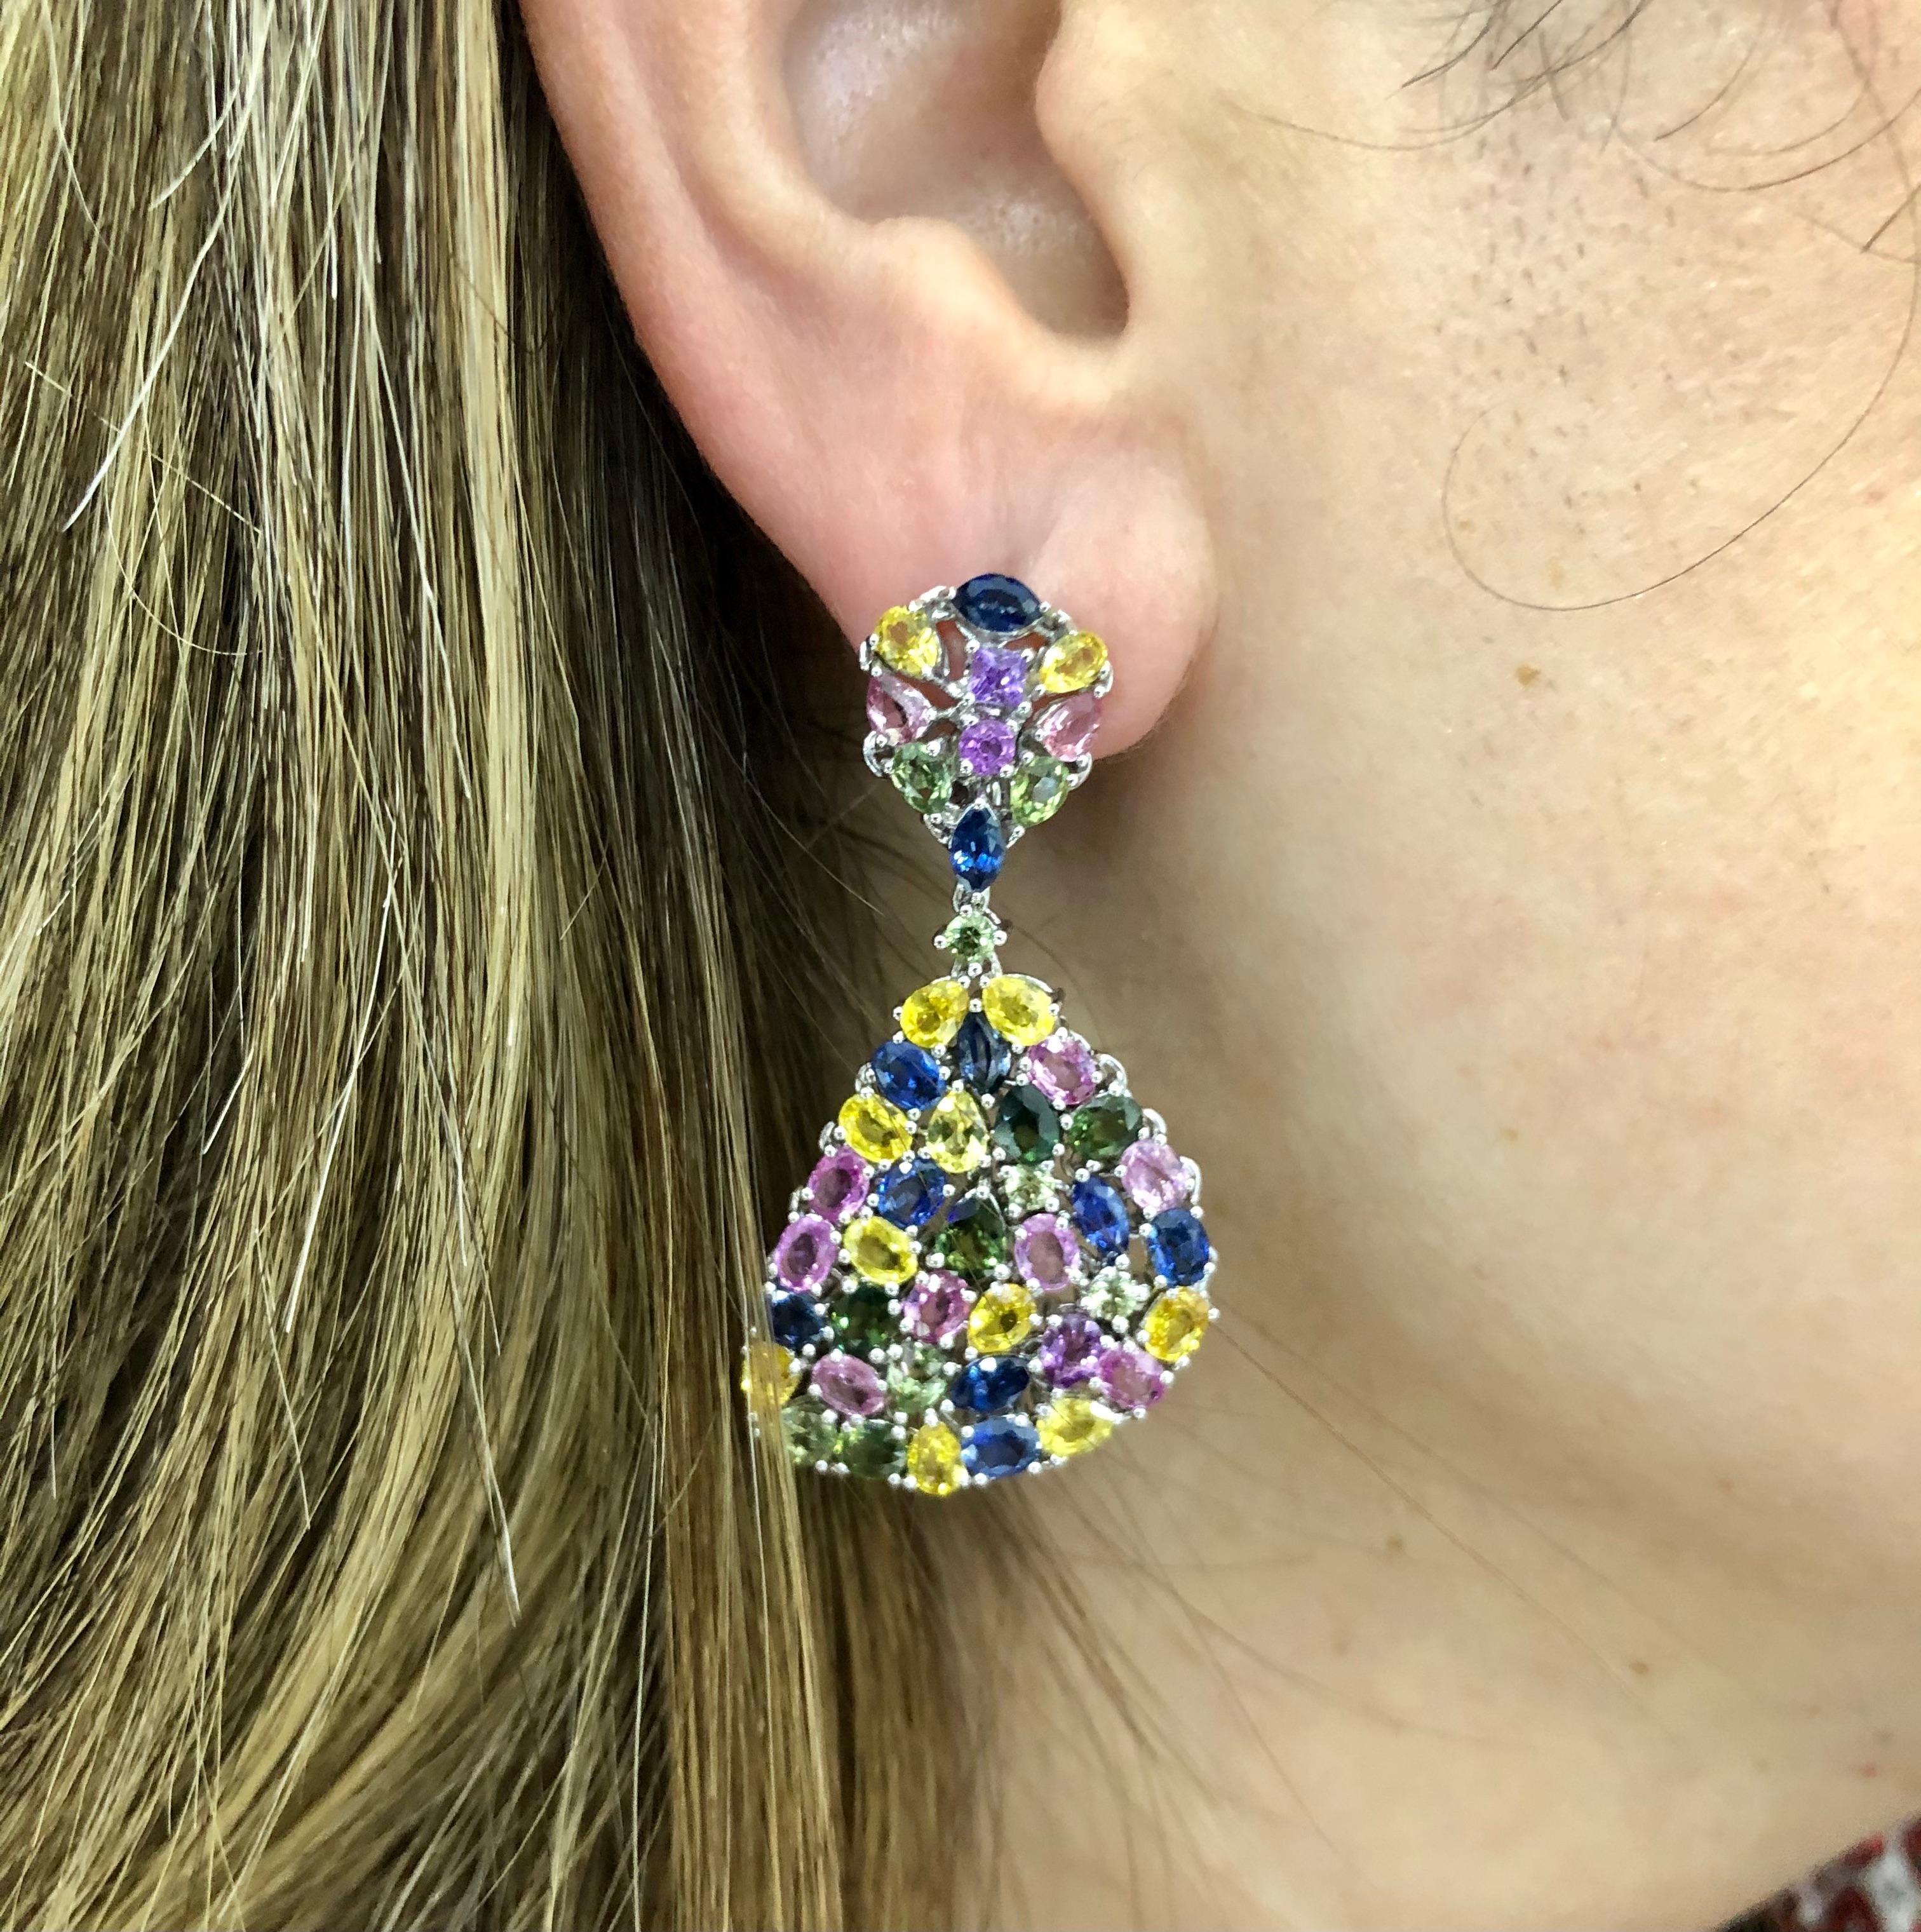 Gorgeous one of a kind earrings crafted in 18k white gold. Fantastic pair that pops with color. The earrings are set with multiple natural colored Sapphire gemstones throughout.  Yellow, blue, green, pink and purple colored Sapphires adorn the pair